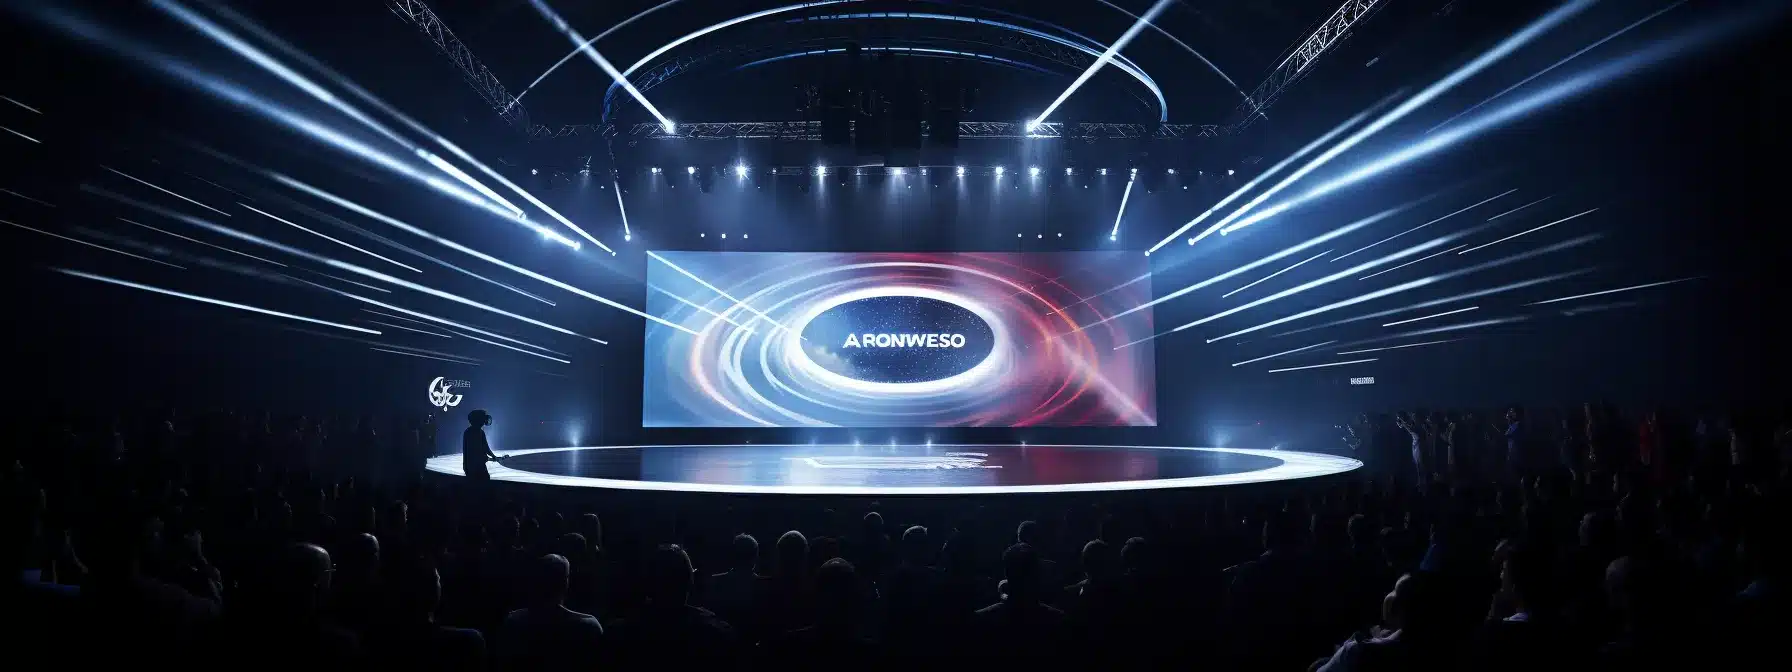 A Brand Logo Illuminated On A Stage With A Spotlight, Capturing The Attention Of A Mesmerized Audience.